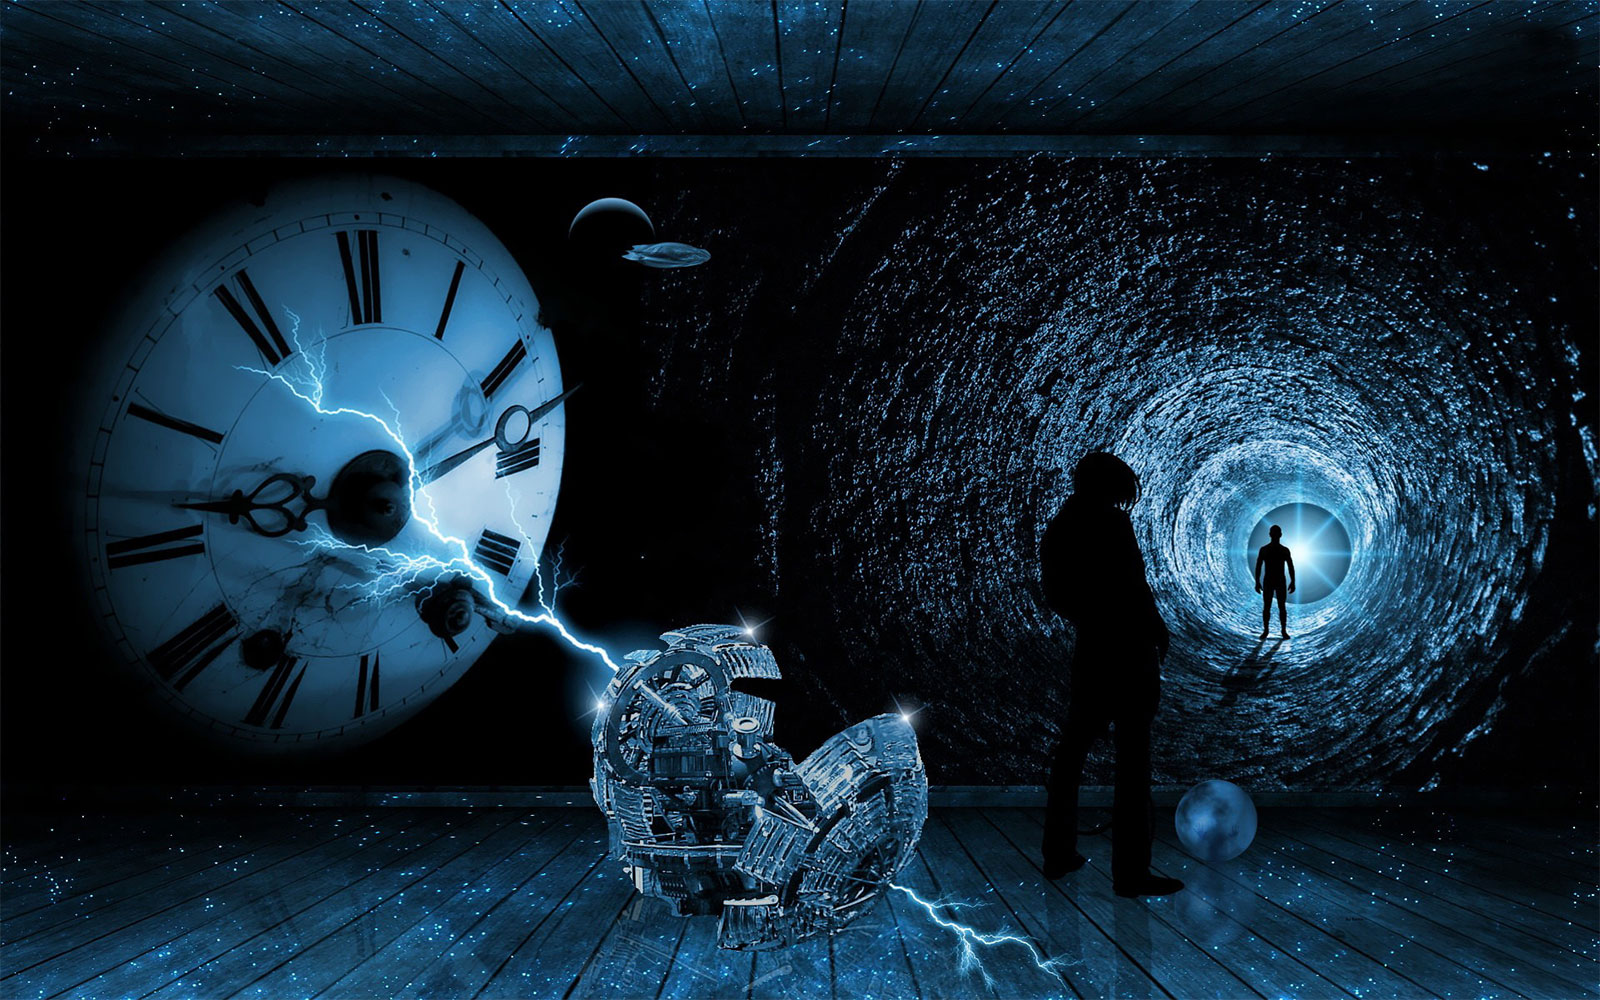 ⏰ Go on a Time Travel Adventure to Find Out Where in History You Truly Belong Time Traveler